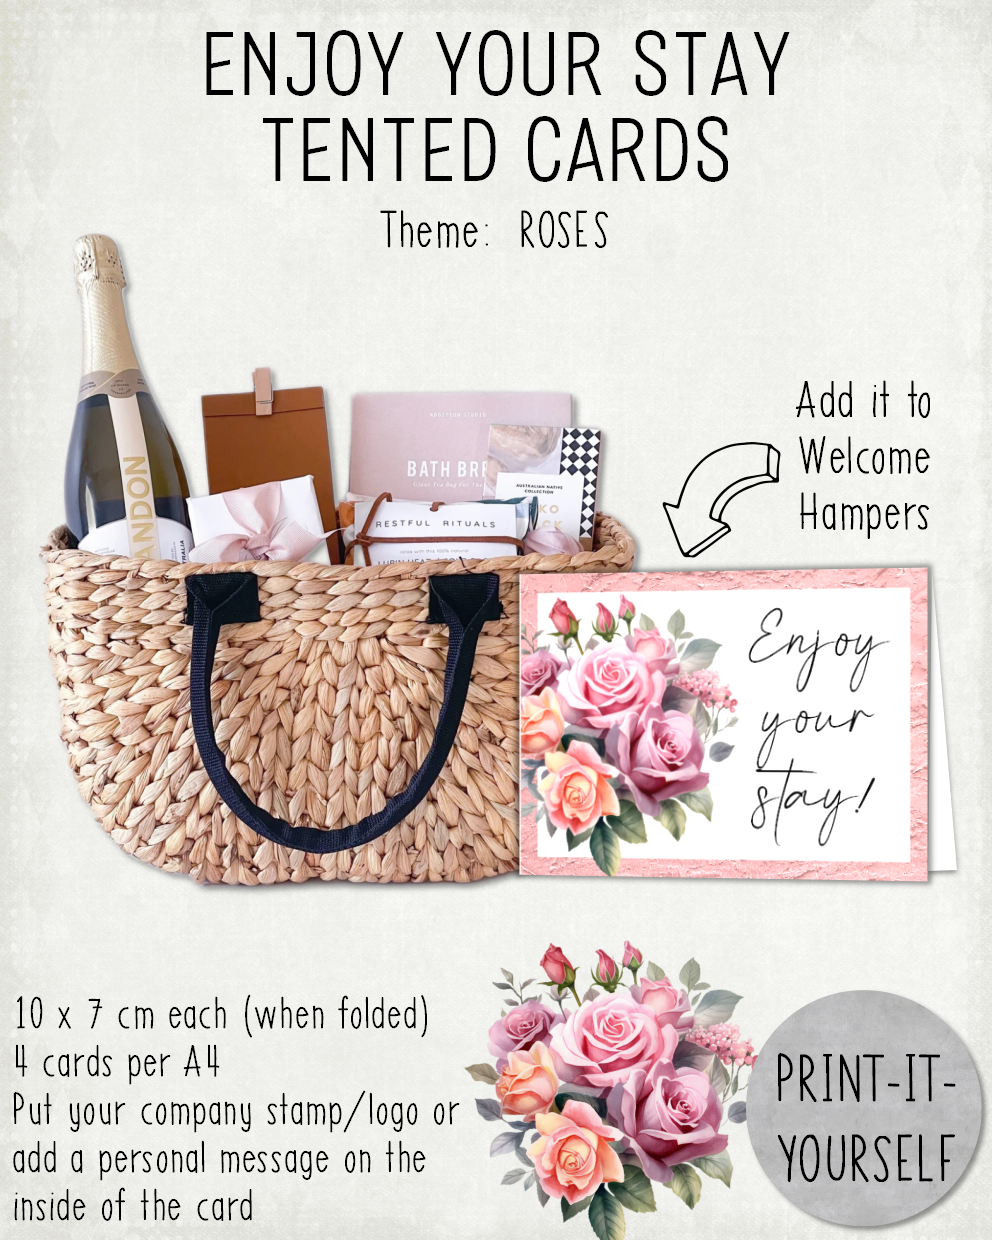 READY TO PRINT:  Enjoy Your Stay Cards - Flower Bundle